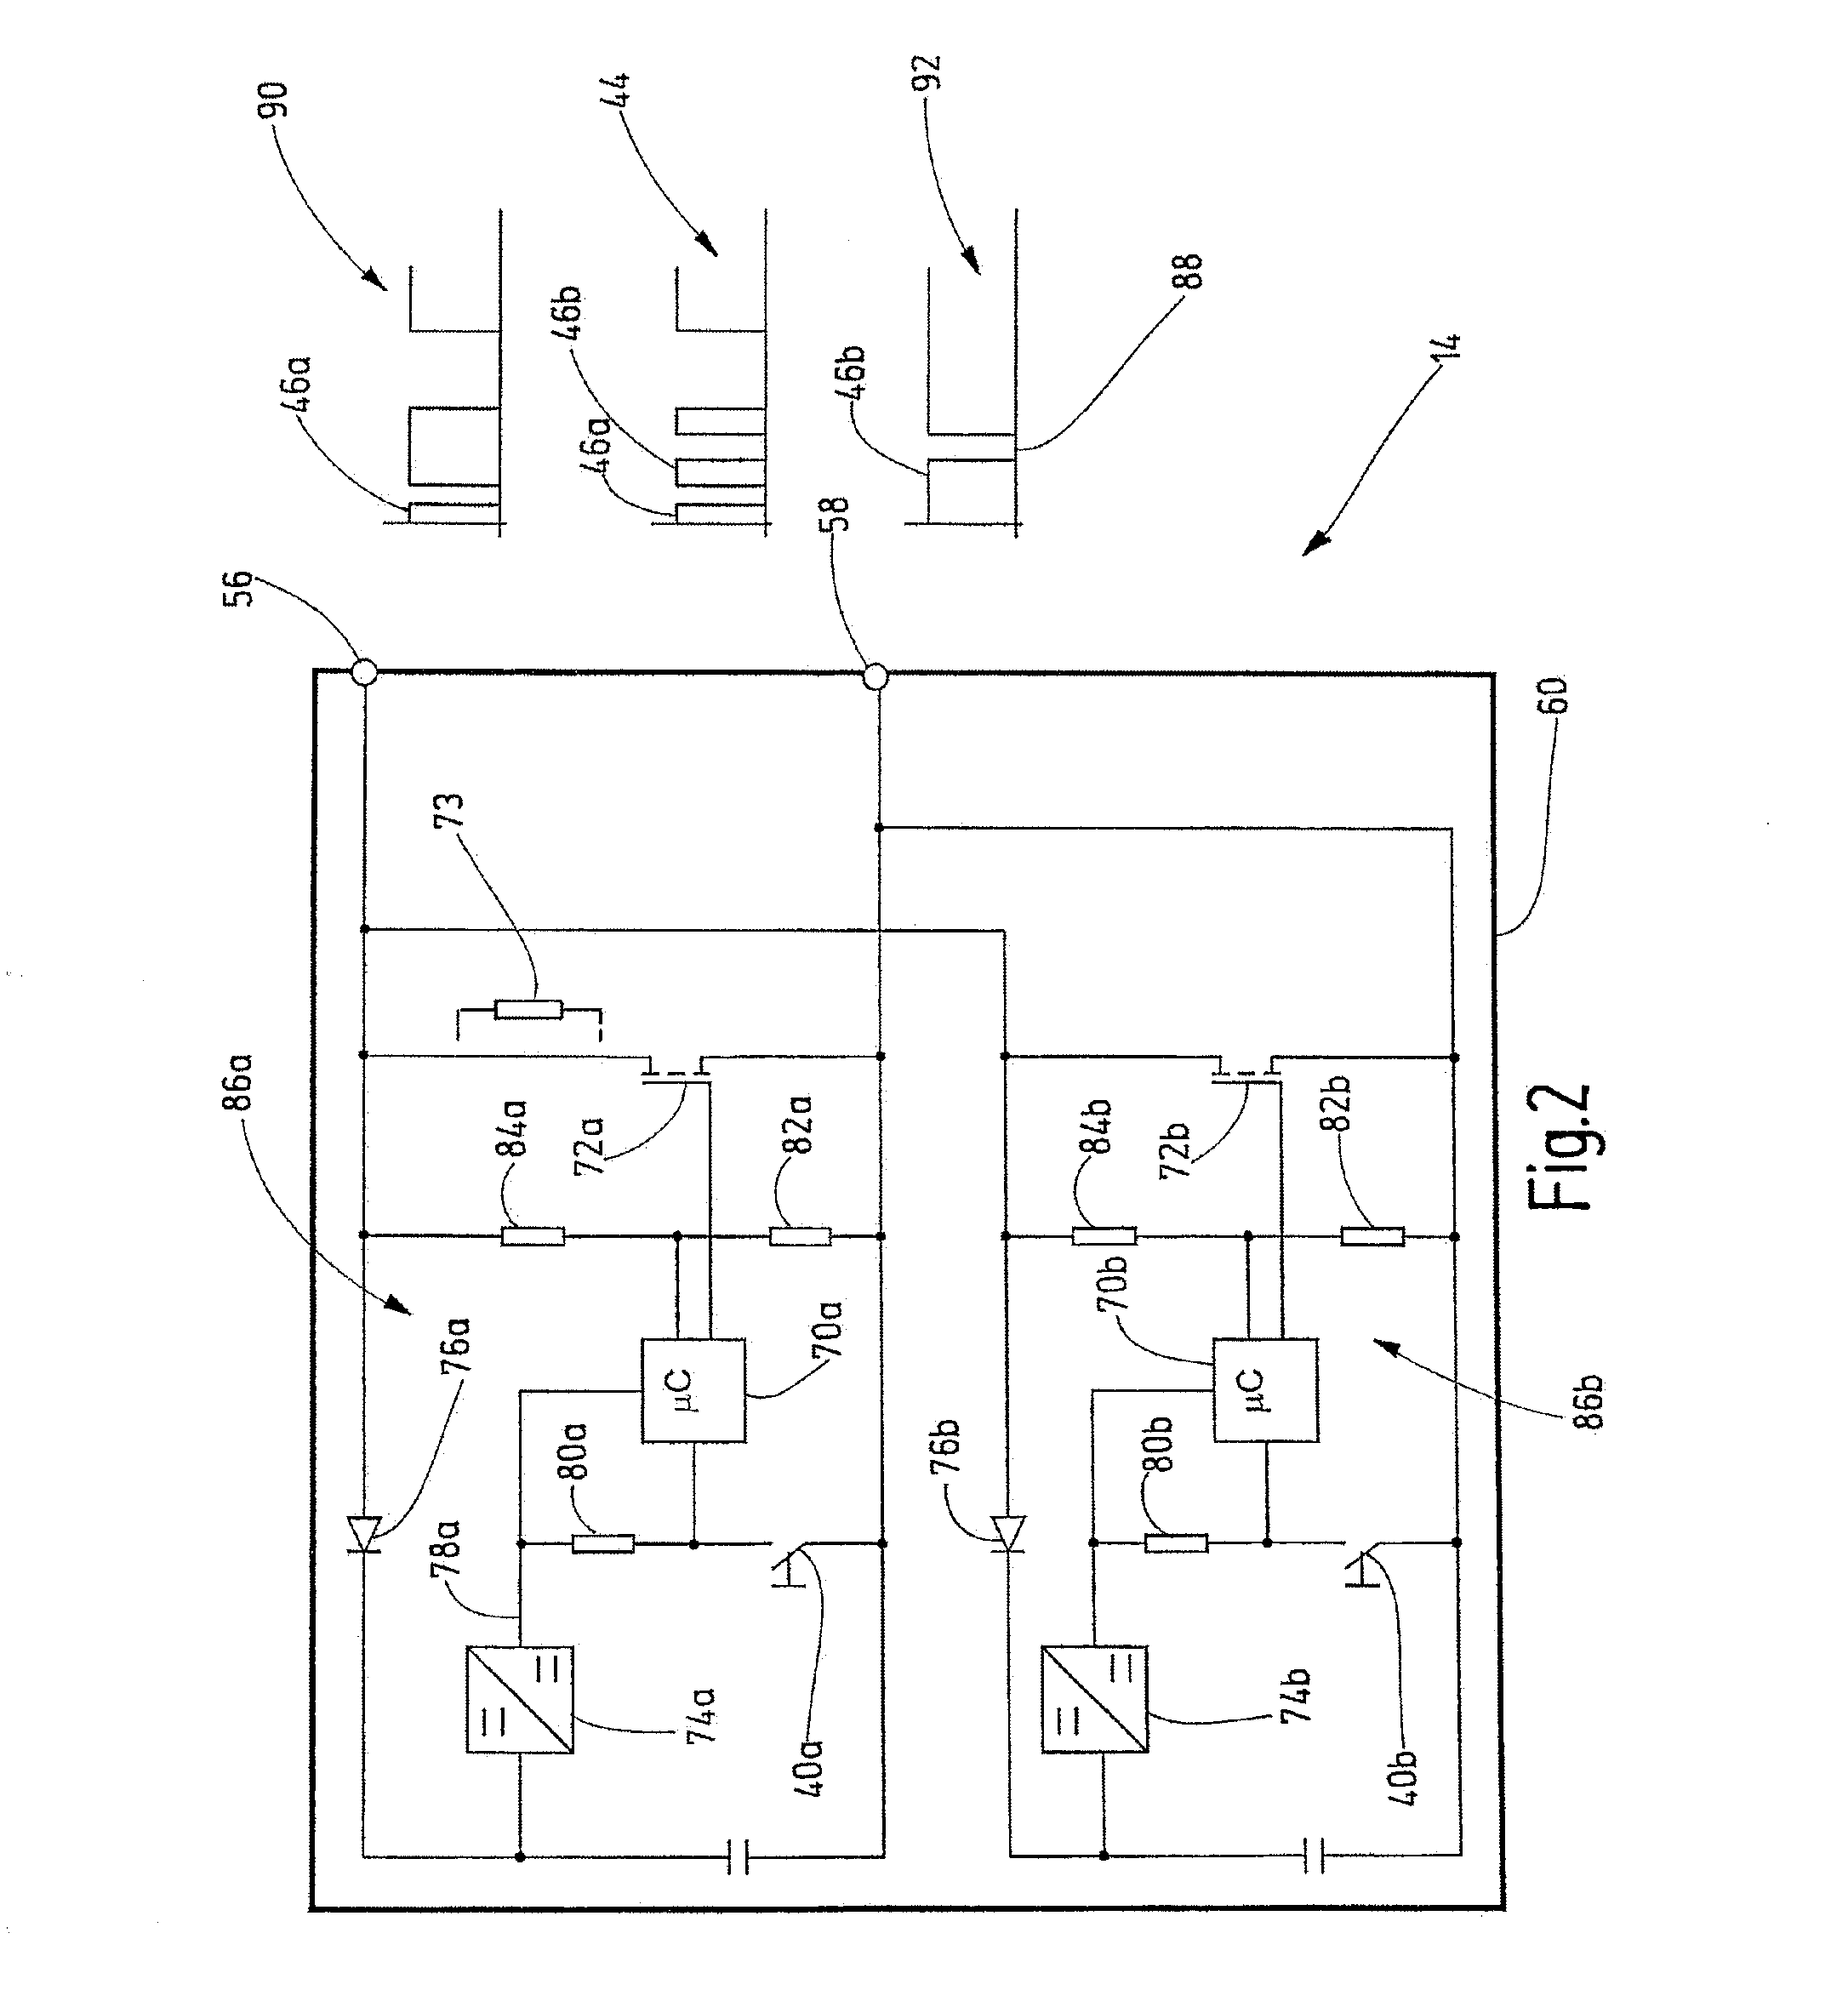 Safety circuit arrangement for connection or failsafe disconnection of a hazardous  installation